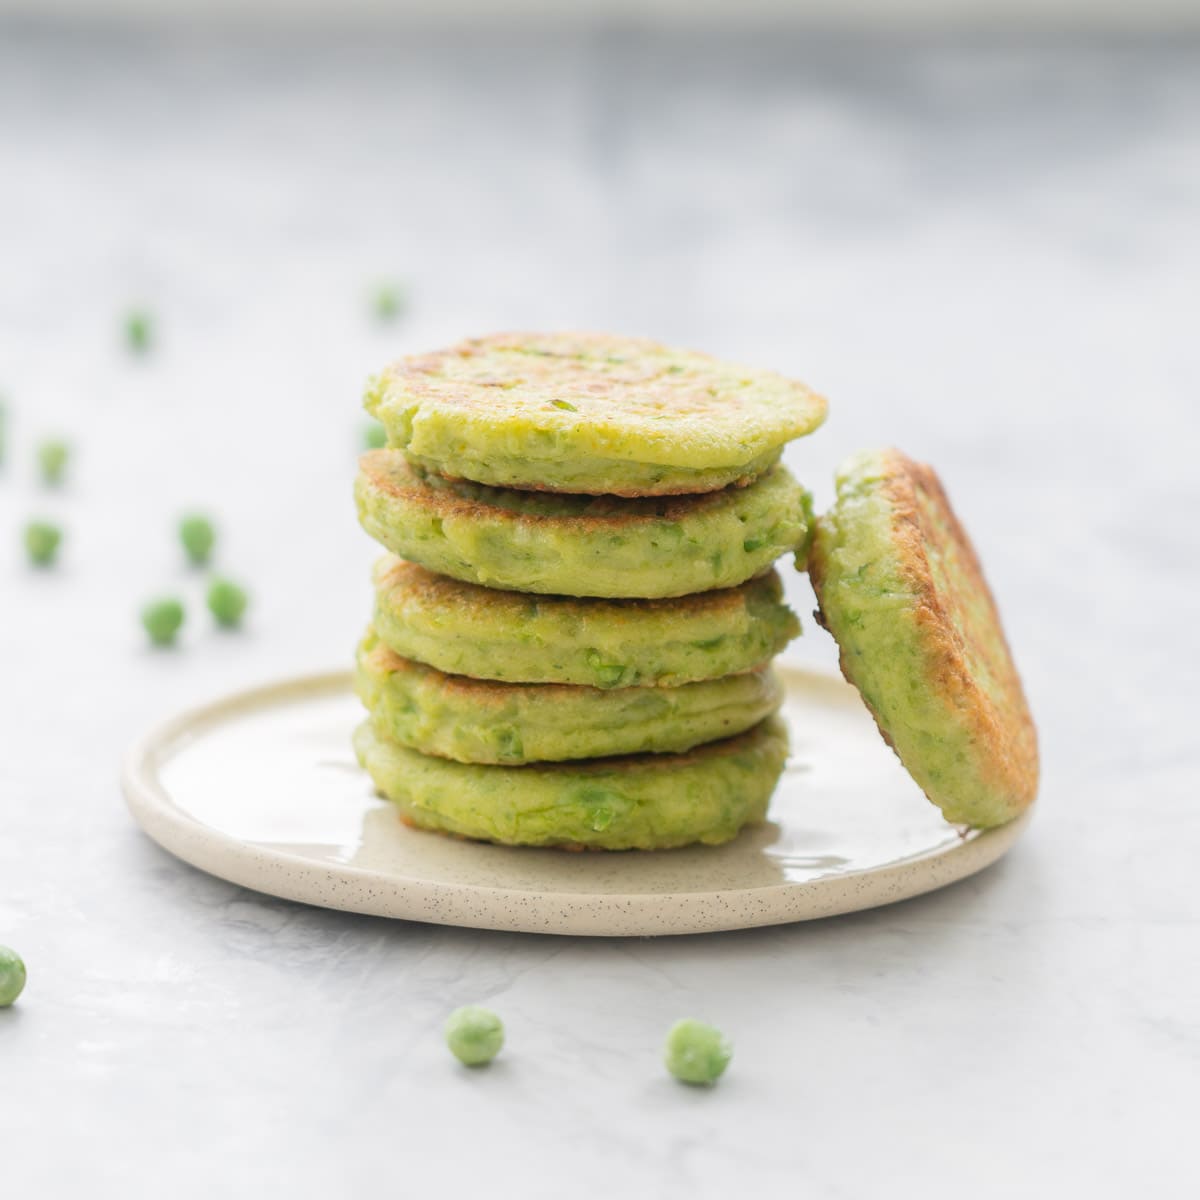 five golden pea fritters stacked on a plate with one leaning against them and a scattering of peas in the background on the bench